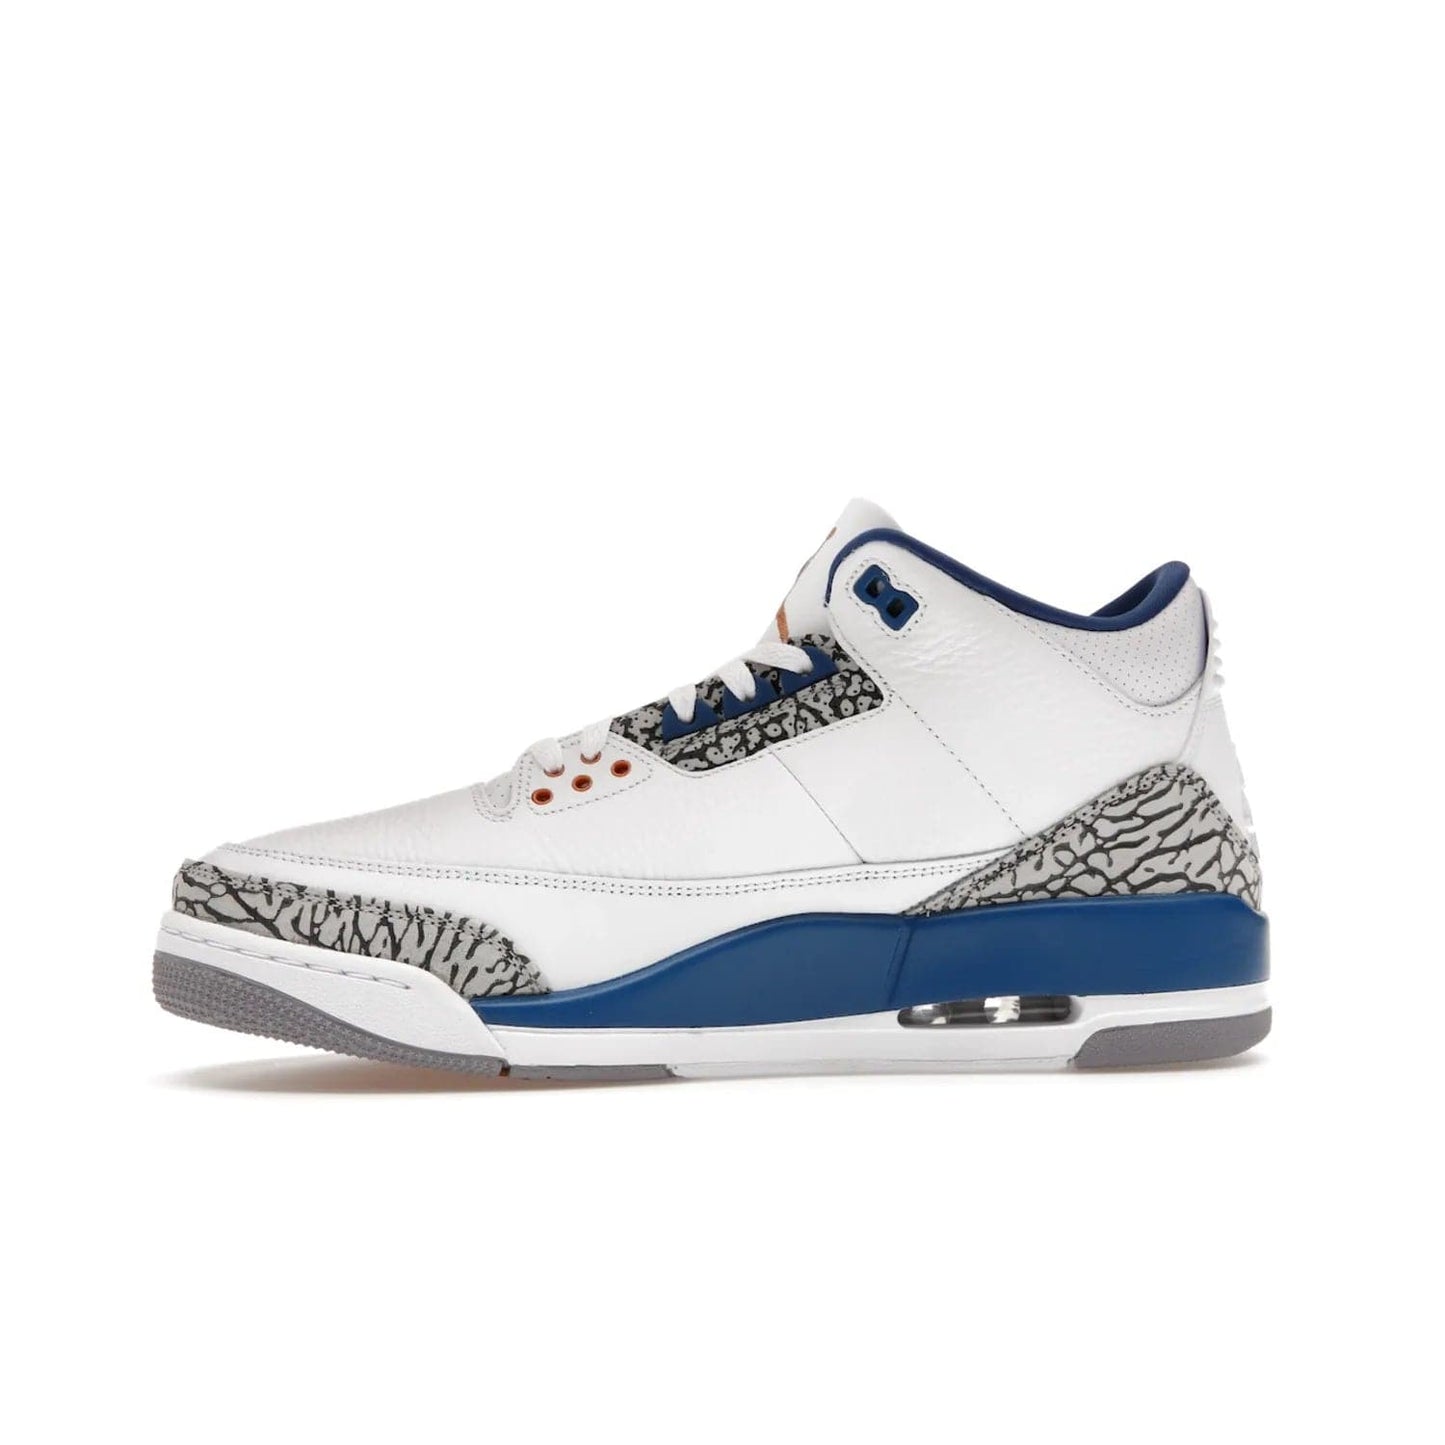 Jordan 3 Retro Wizards - Image 18 - Only at www.BallersClubKickz.com - ##
Special tribute sneaker from Jordan Brand to Michael Jordan's time with the Washington Wizards. Iconic white upper, orange Jumpman logo, blue accents, metallic copper details, and cement grey outsole. Buy the Air Jordan 3 Retro Wizards April 29, 2023.